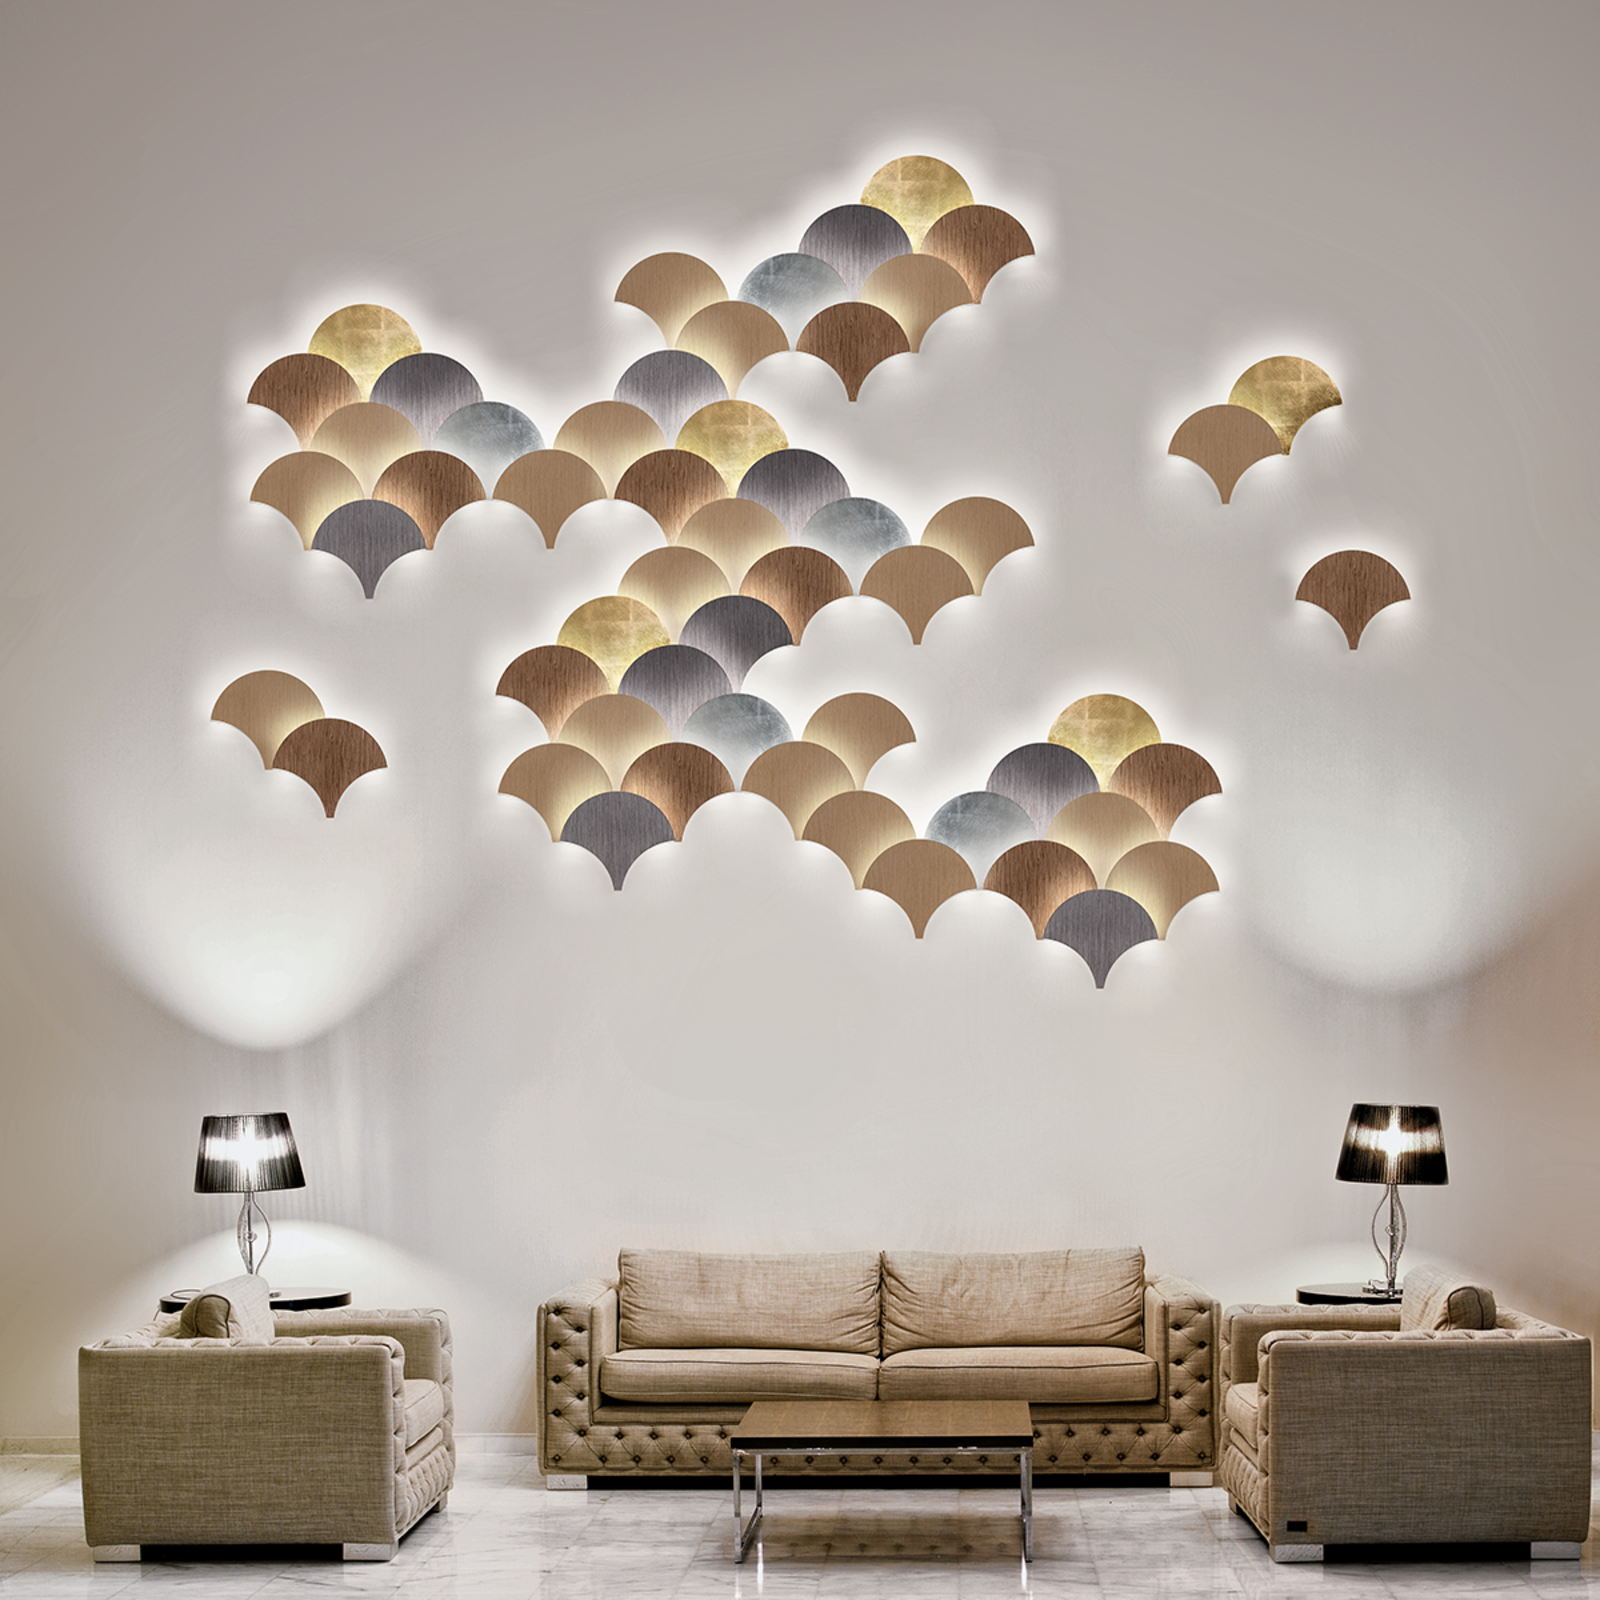 Exceptional LED wall light Palm, walnut